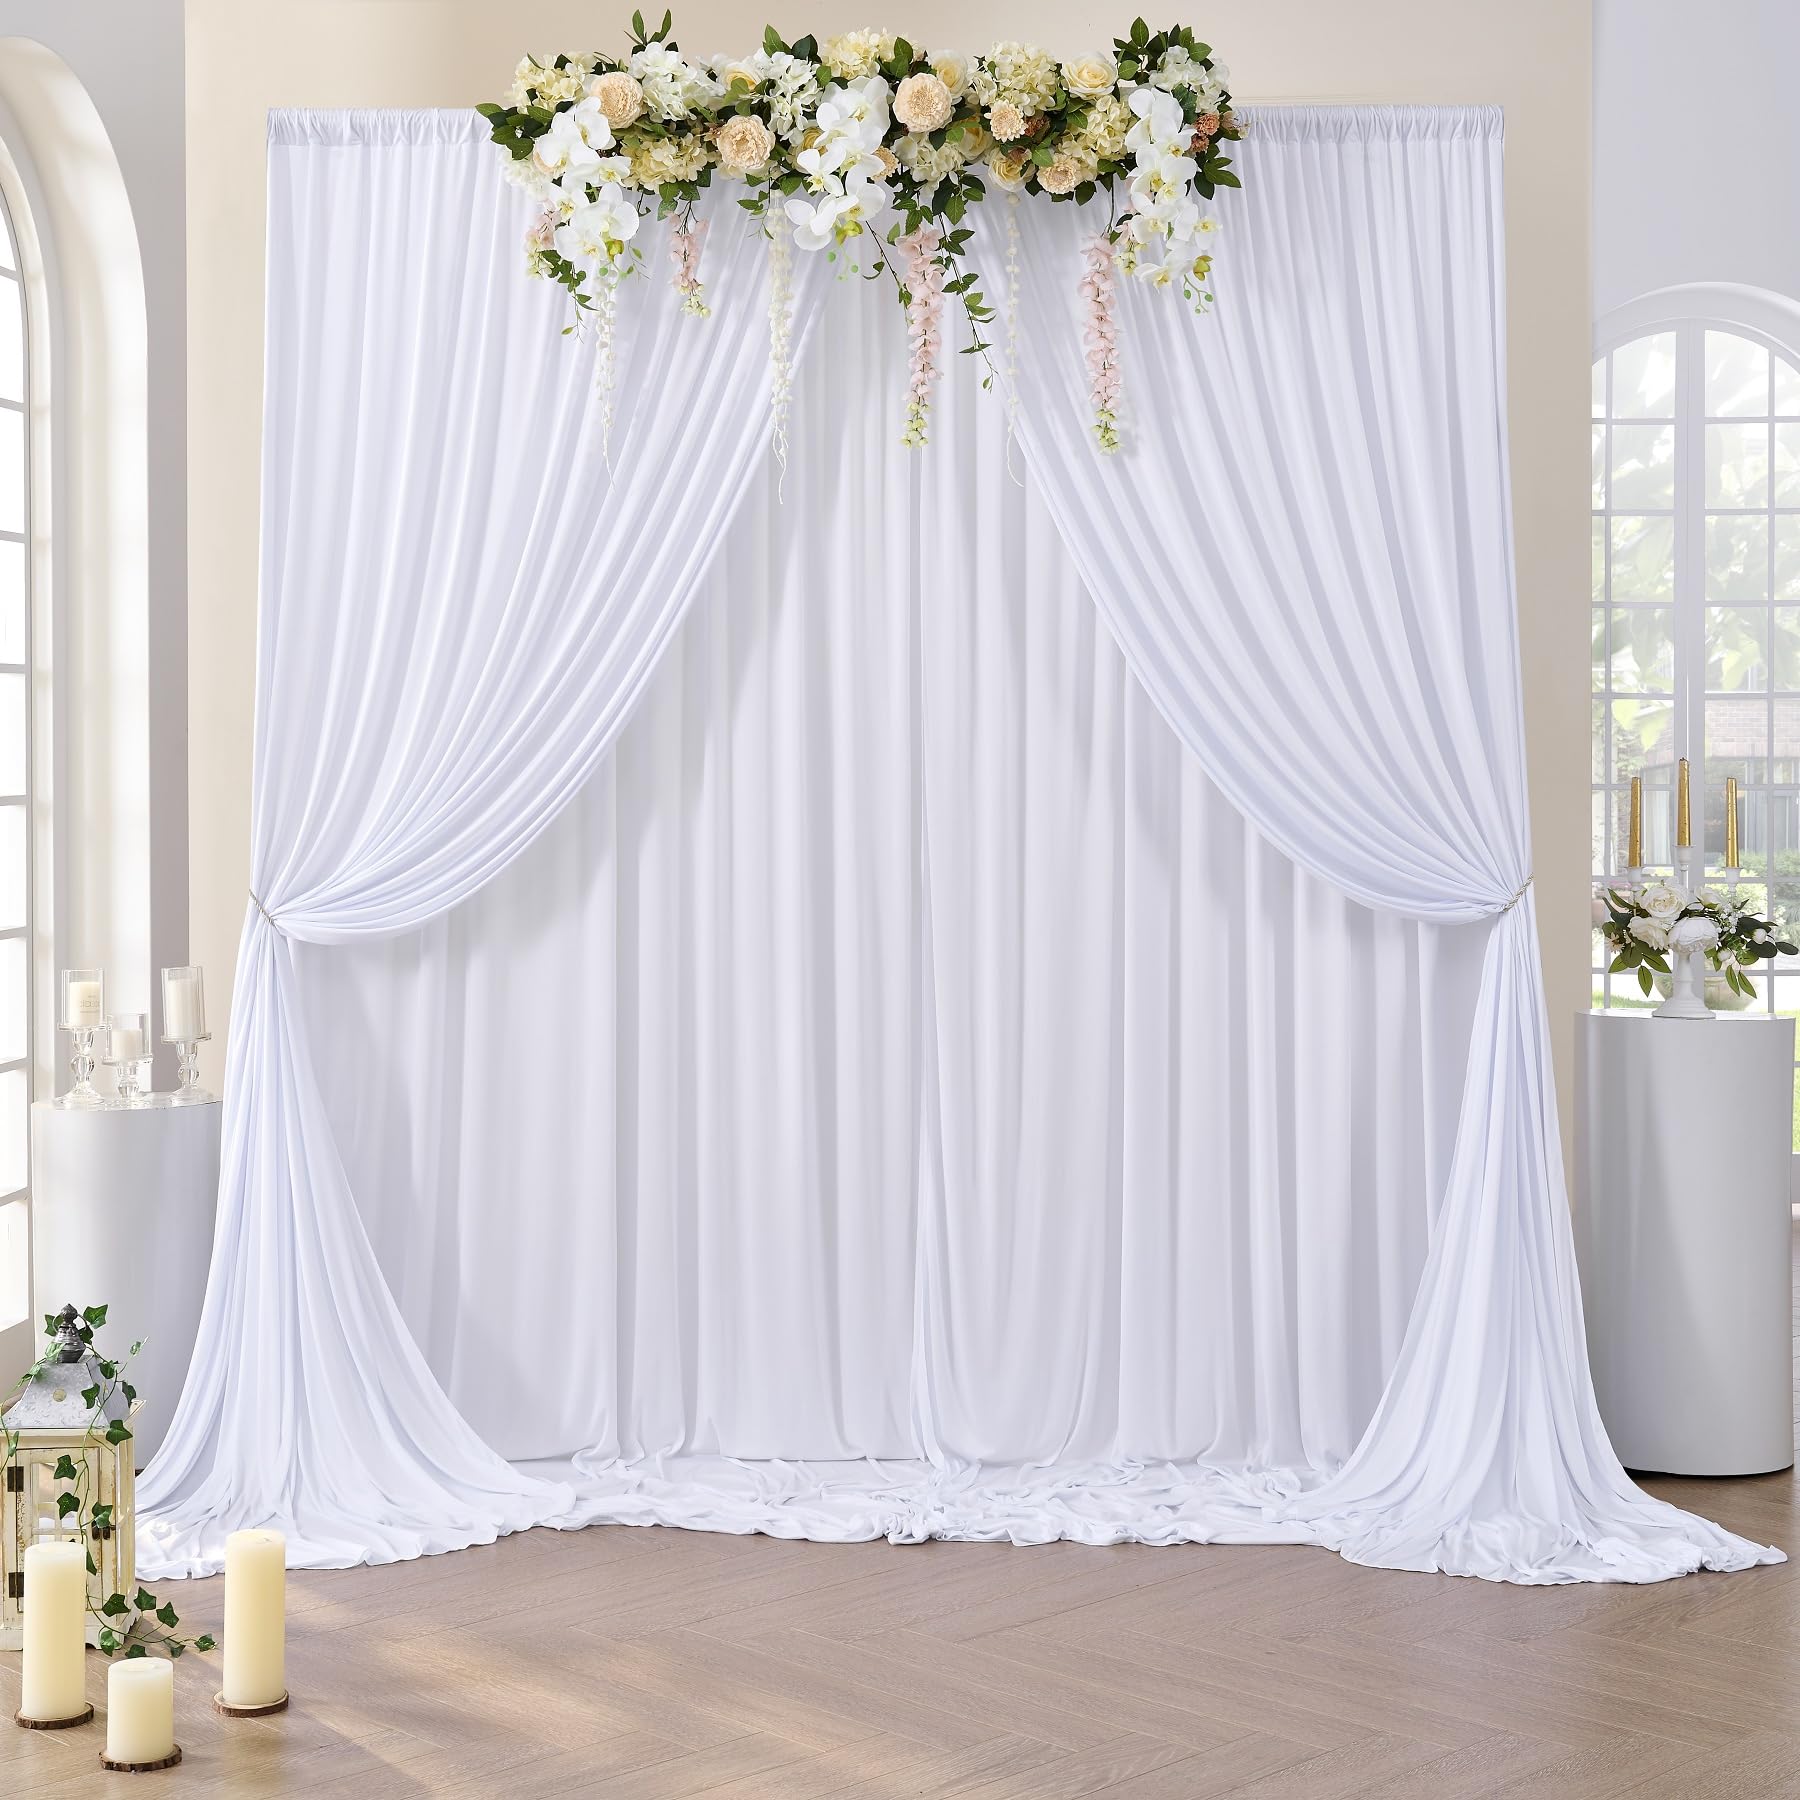 20 ft x 10 ft Wrinkle Free White Backdrop Curtain Panels, Polyester Photography Backdrop Drapes, Wedding Party Home Decoration Supplies